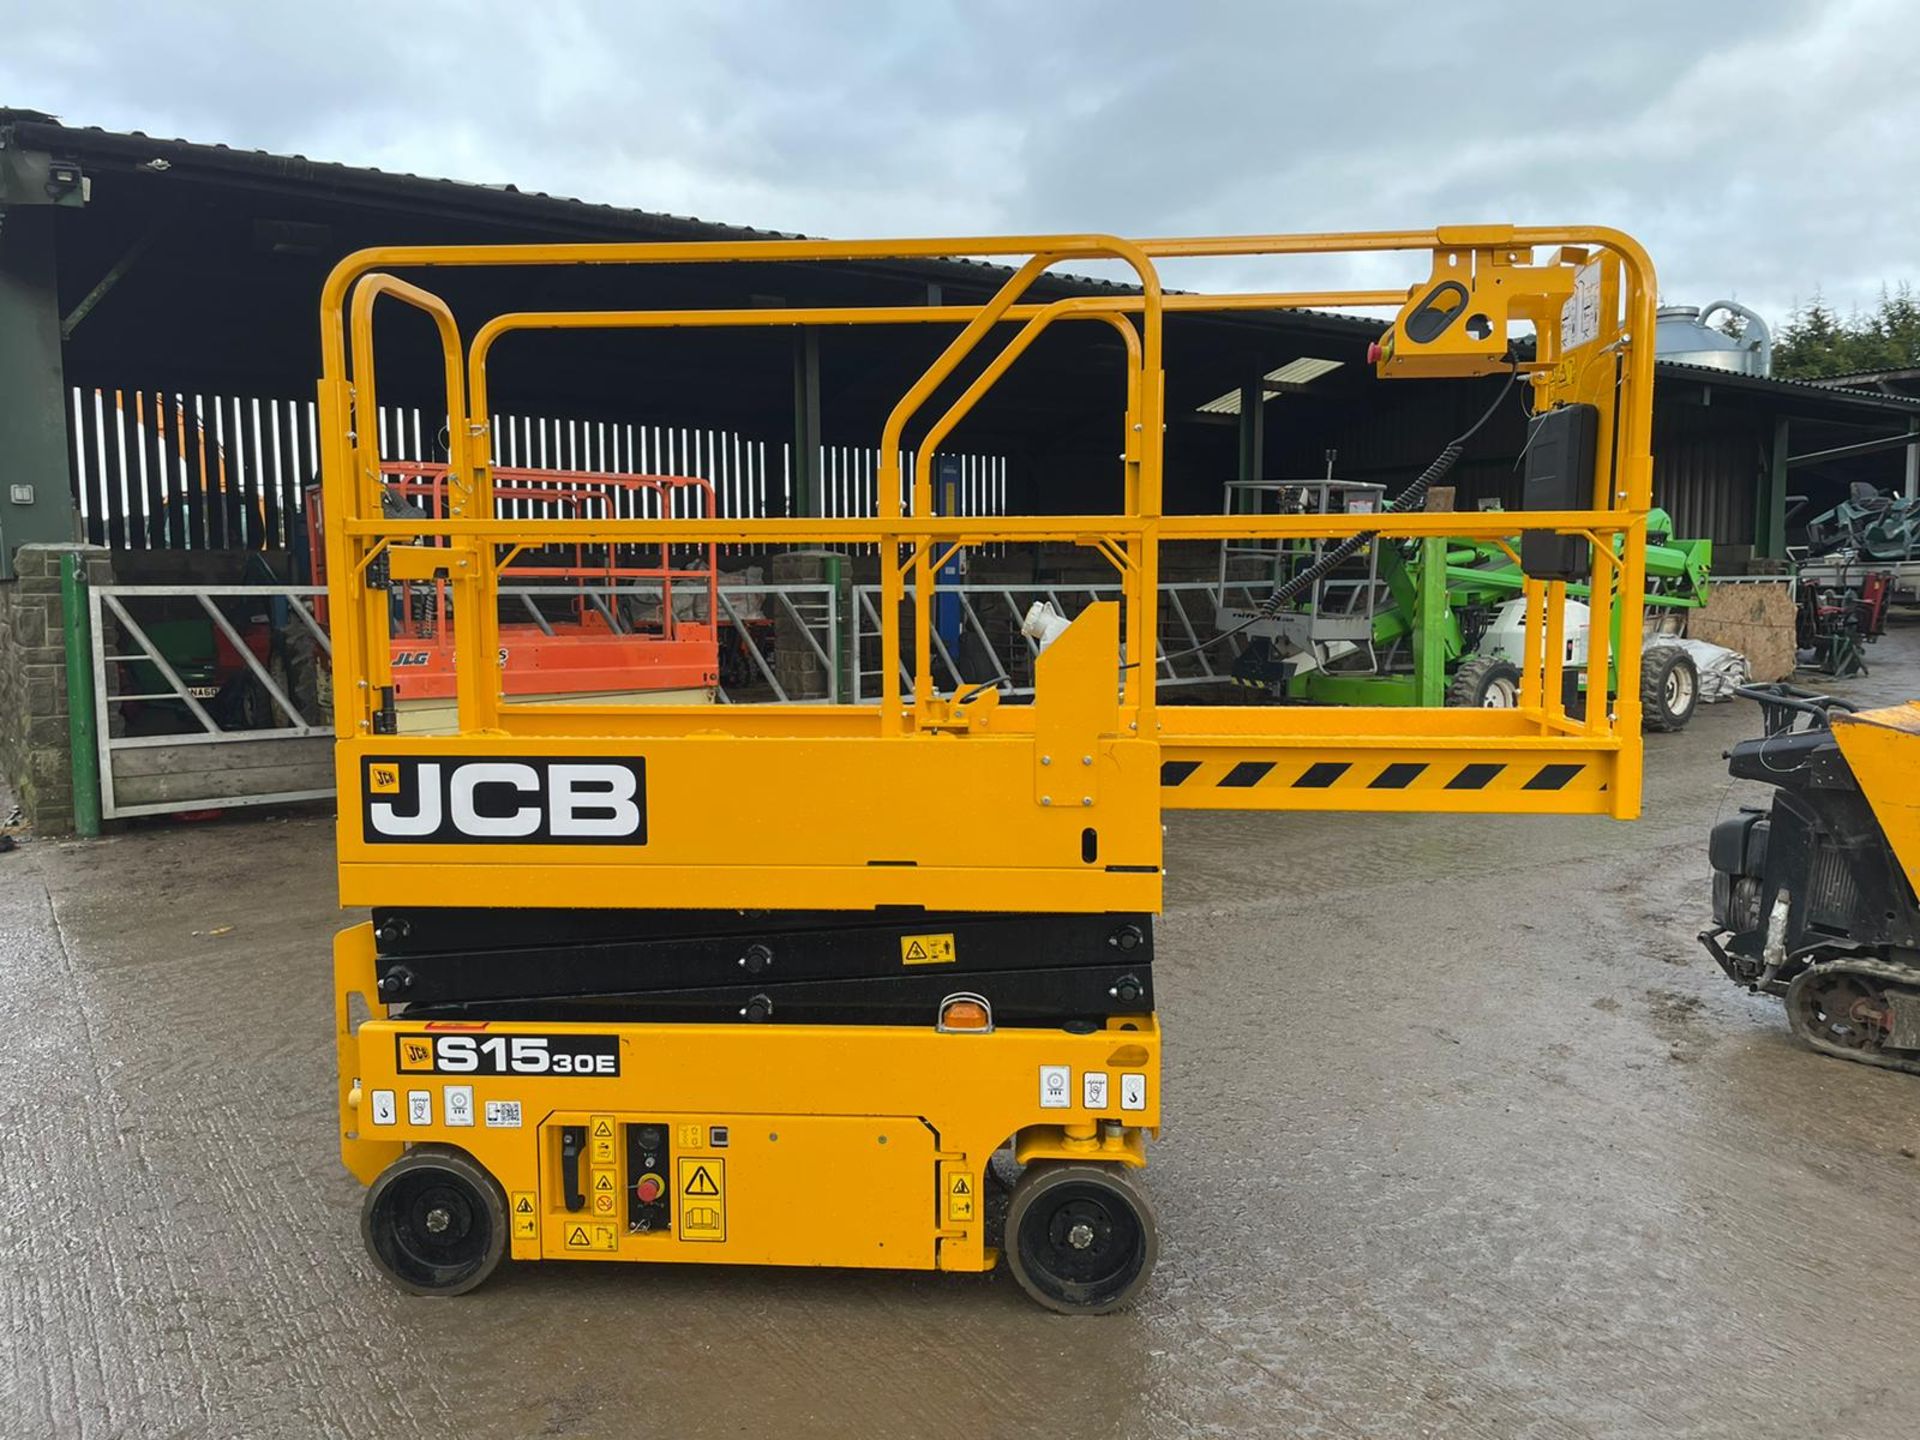 2019 JCB S1530E ELECTRIC SCISSOR LIFT, as new - EX DEMO CONDITION 3 hrs only *PLUS VAT* - Image 3 of 5